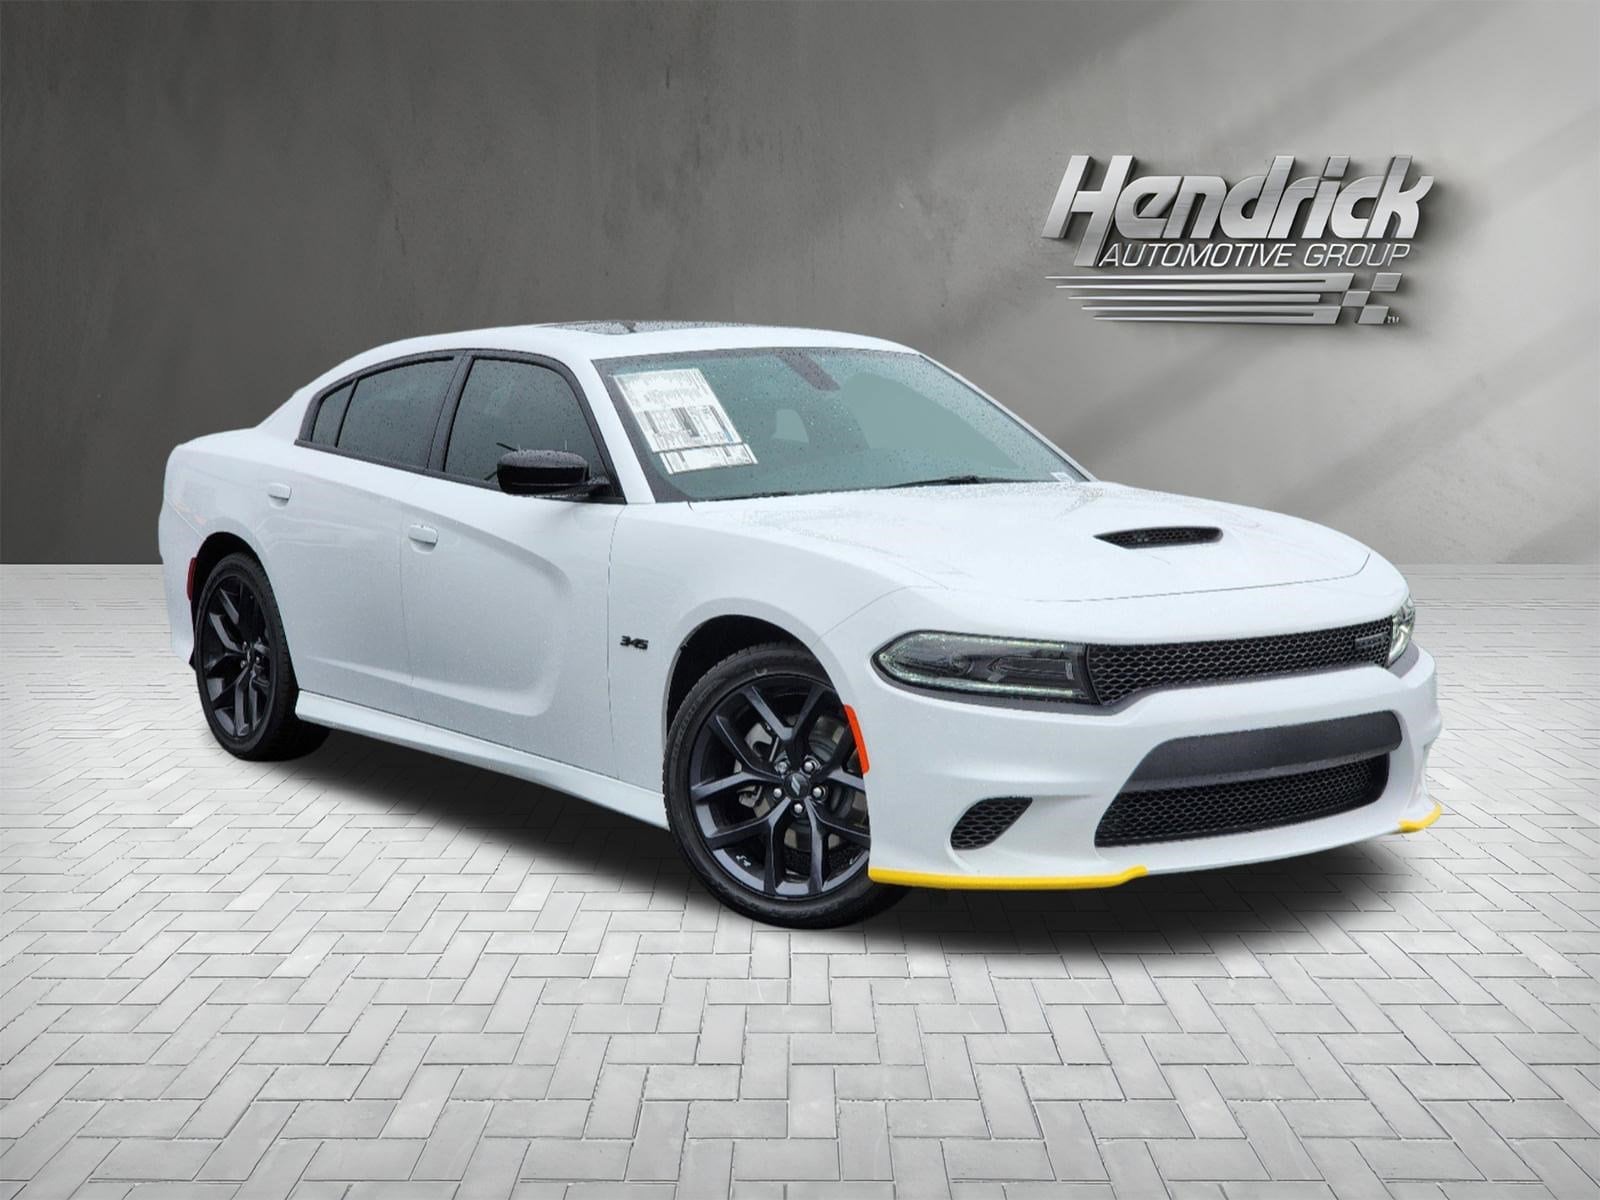 New 2023 Dodge Charger For Sale in Hoover - VIN: 2C3CDXCT5PH700980